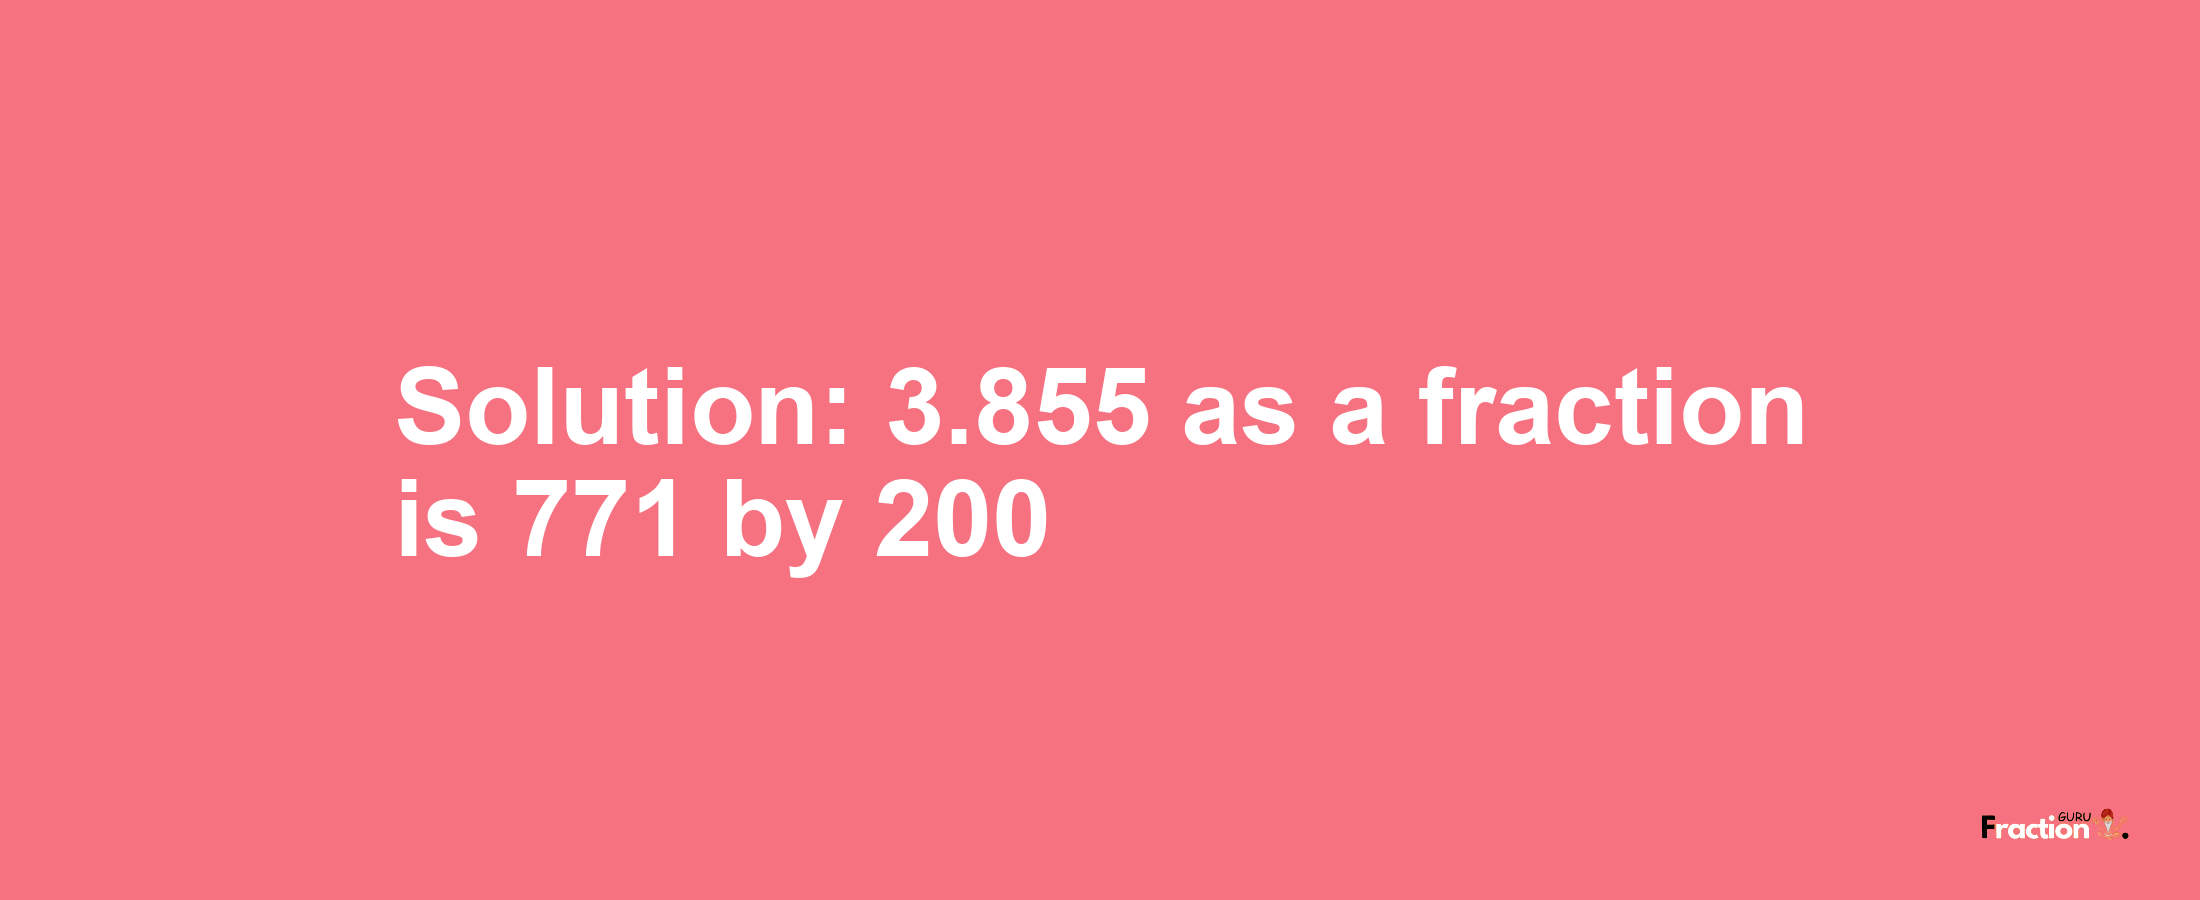 Solution:3.855 as a fraction is 771/200